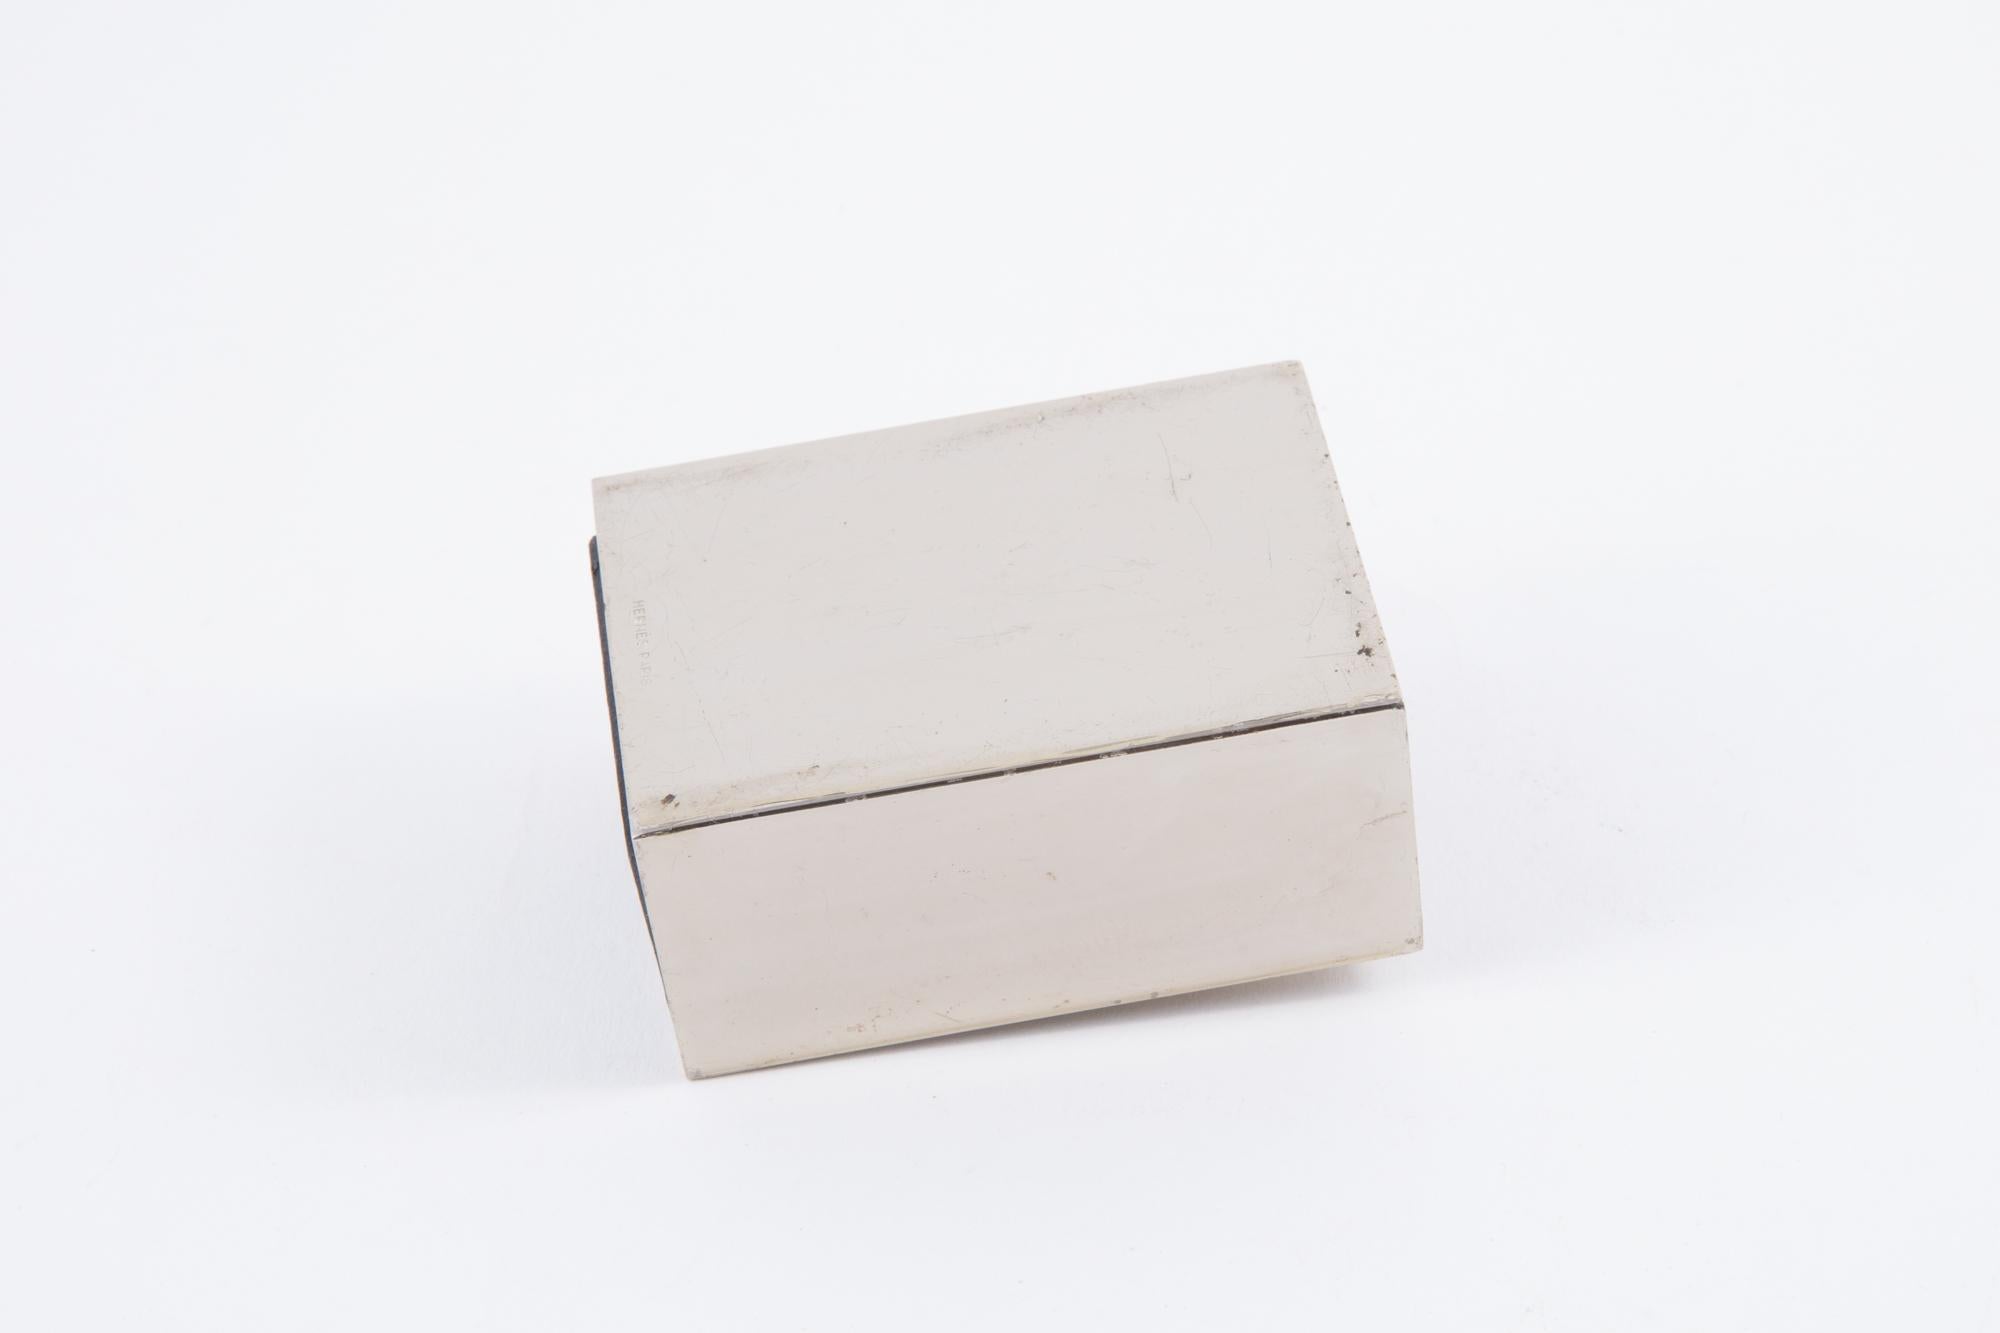 Hermes 1960s old matches box featuring a front gold plated decorative horn, pitted Hermes Paris.
Made in France.
In good vintage condition. Made in France.
3.1in. (8cm) X 2.3in. (6cm) X 1.5in. (4cm)
We guarantee you will receive this  iconic item as